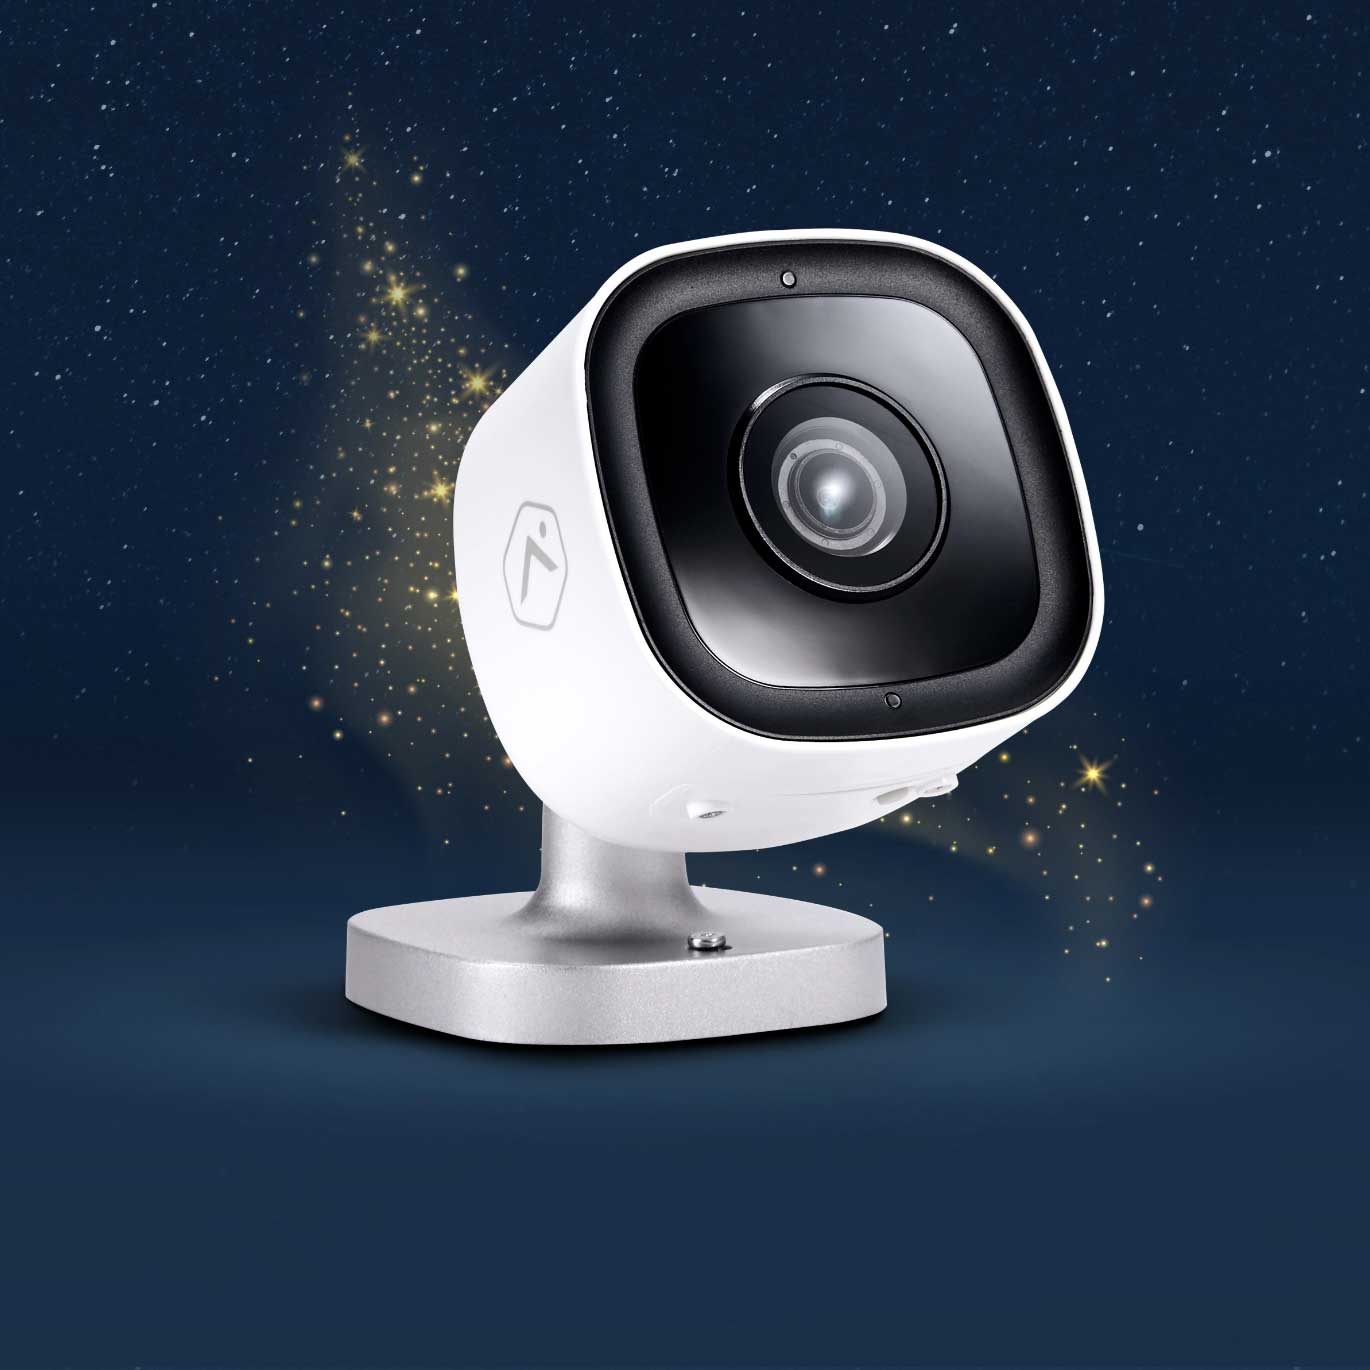 Home security camera with stars background